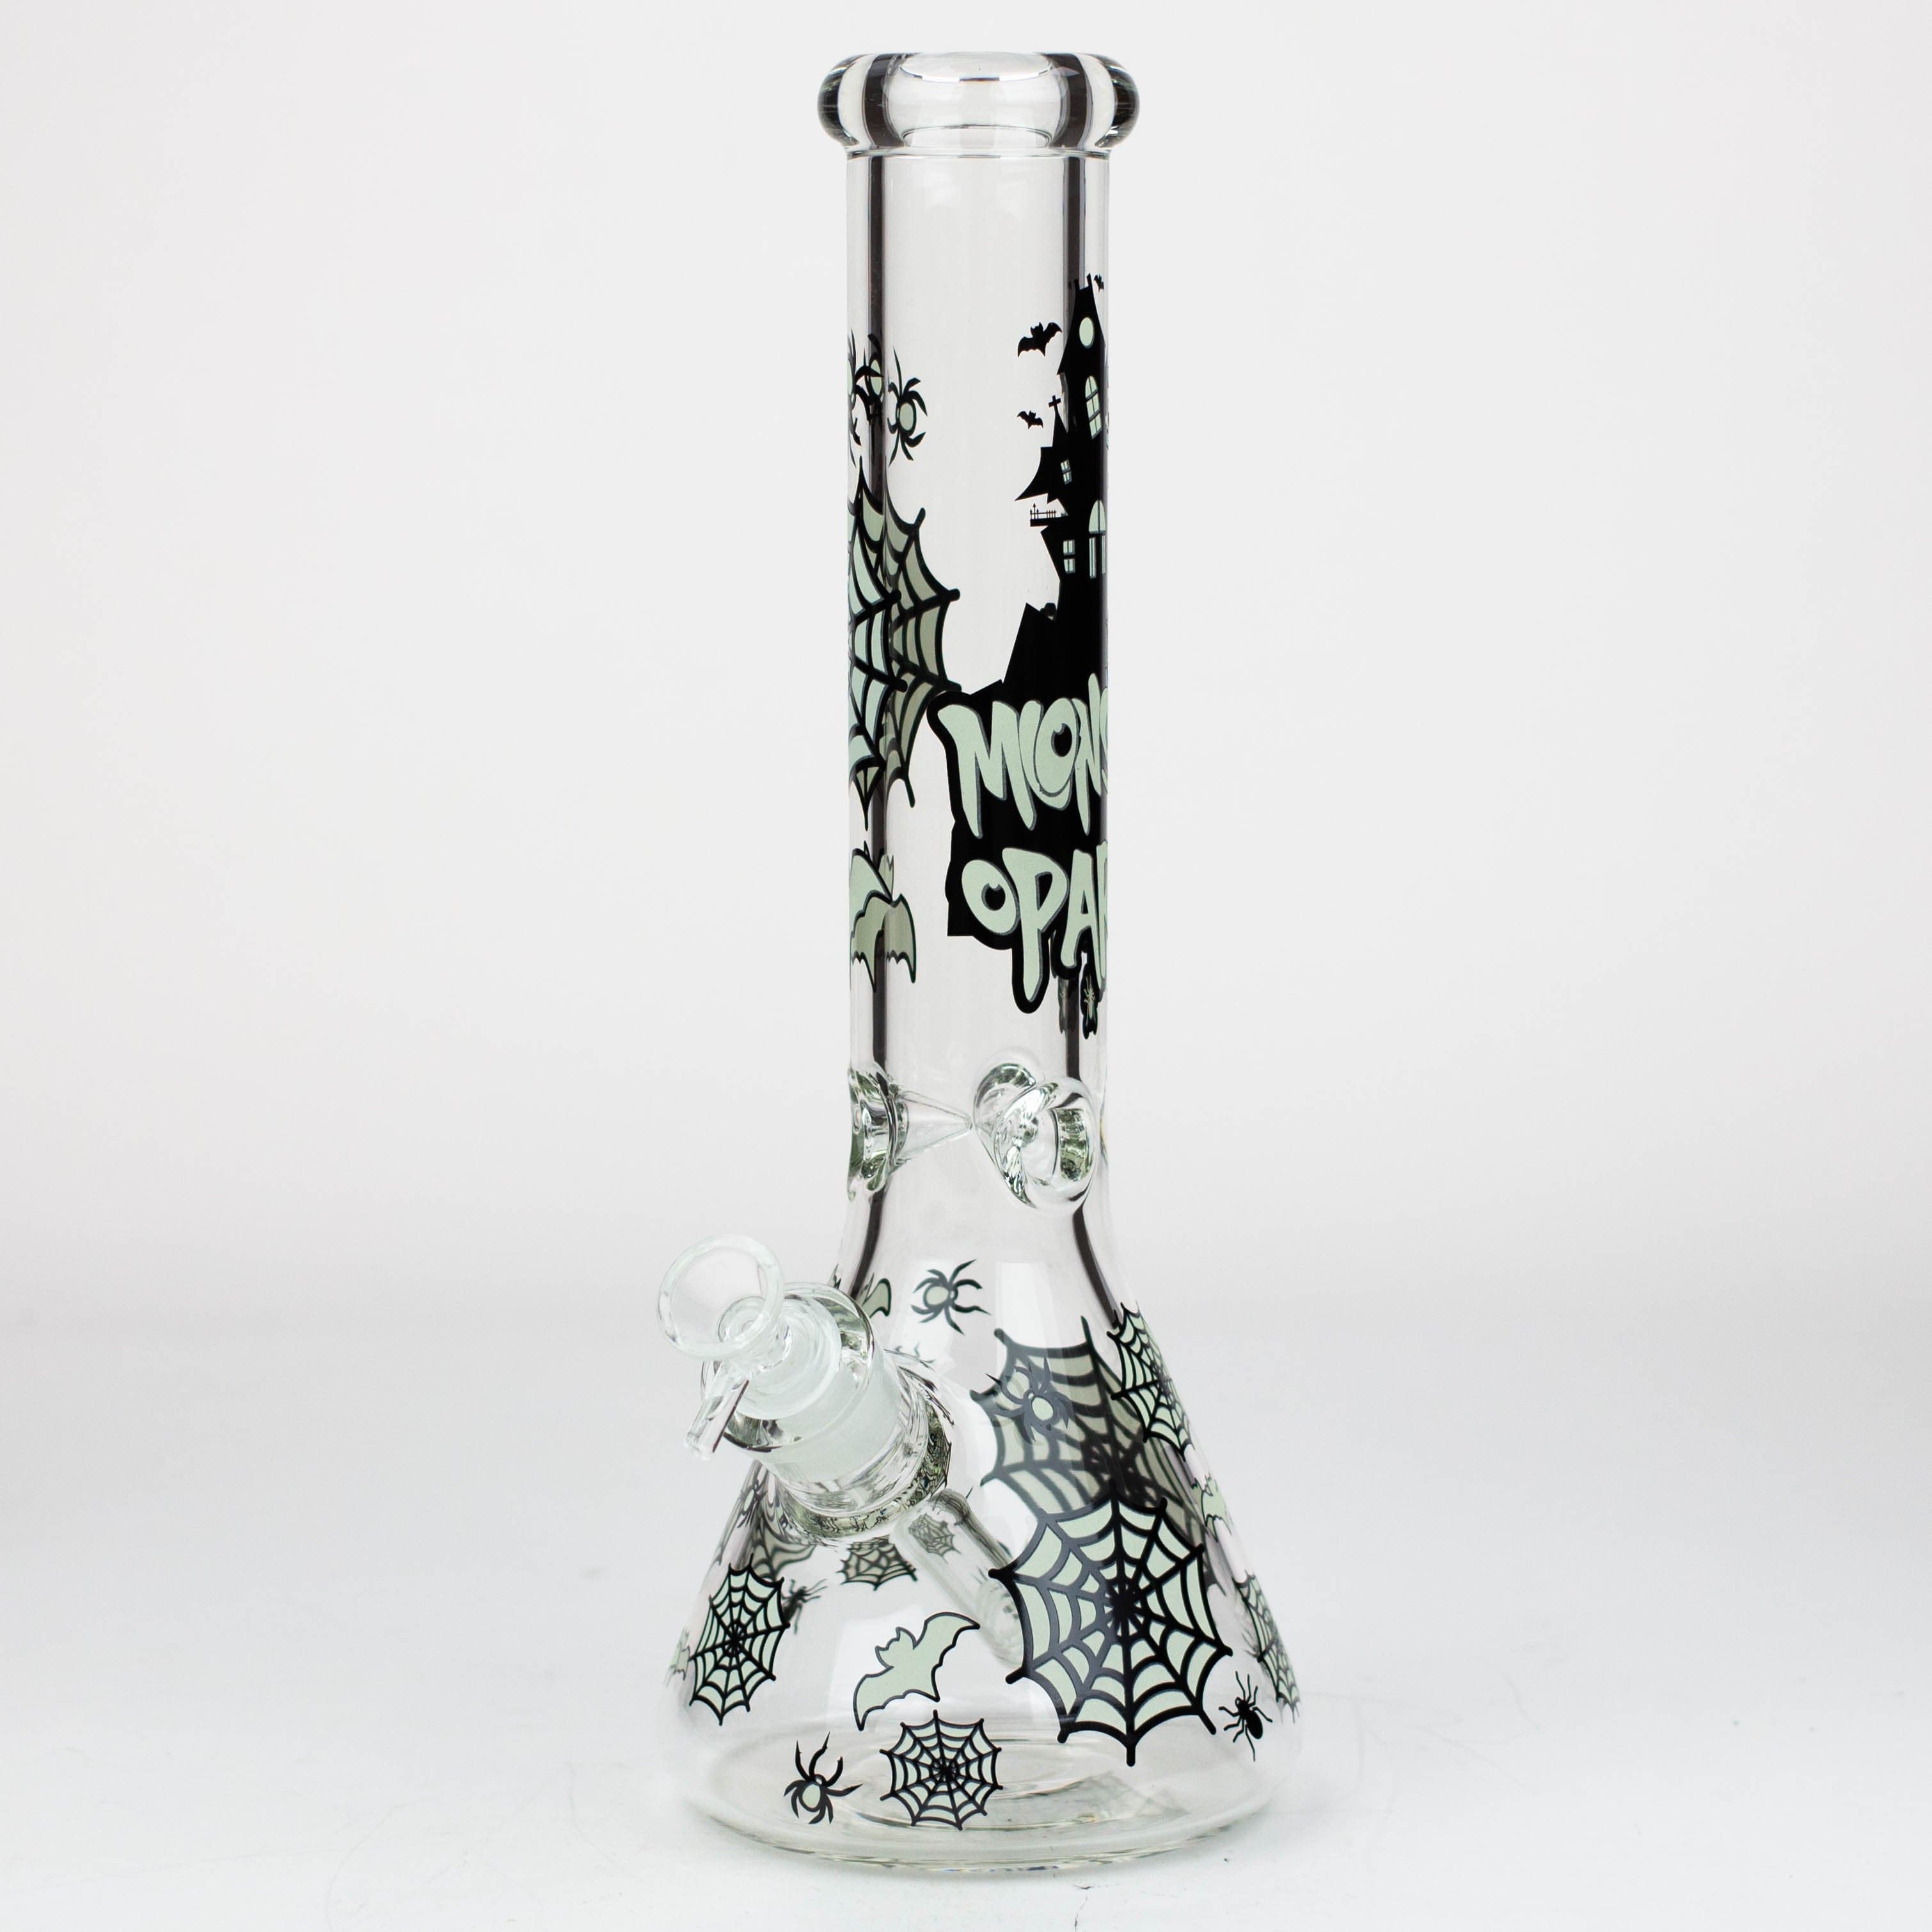 Glow in the dark 7 mm glass water pipes 14"_14